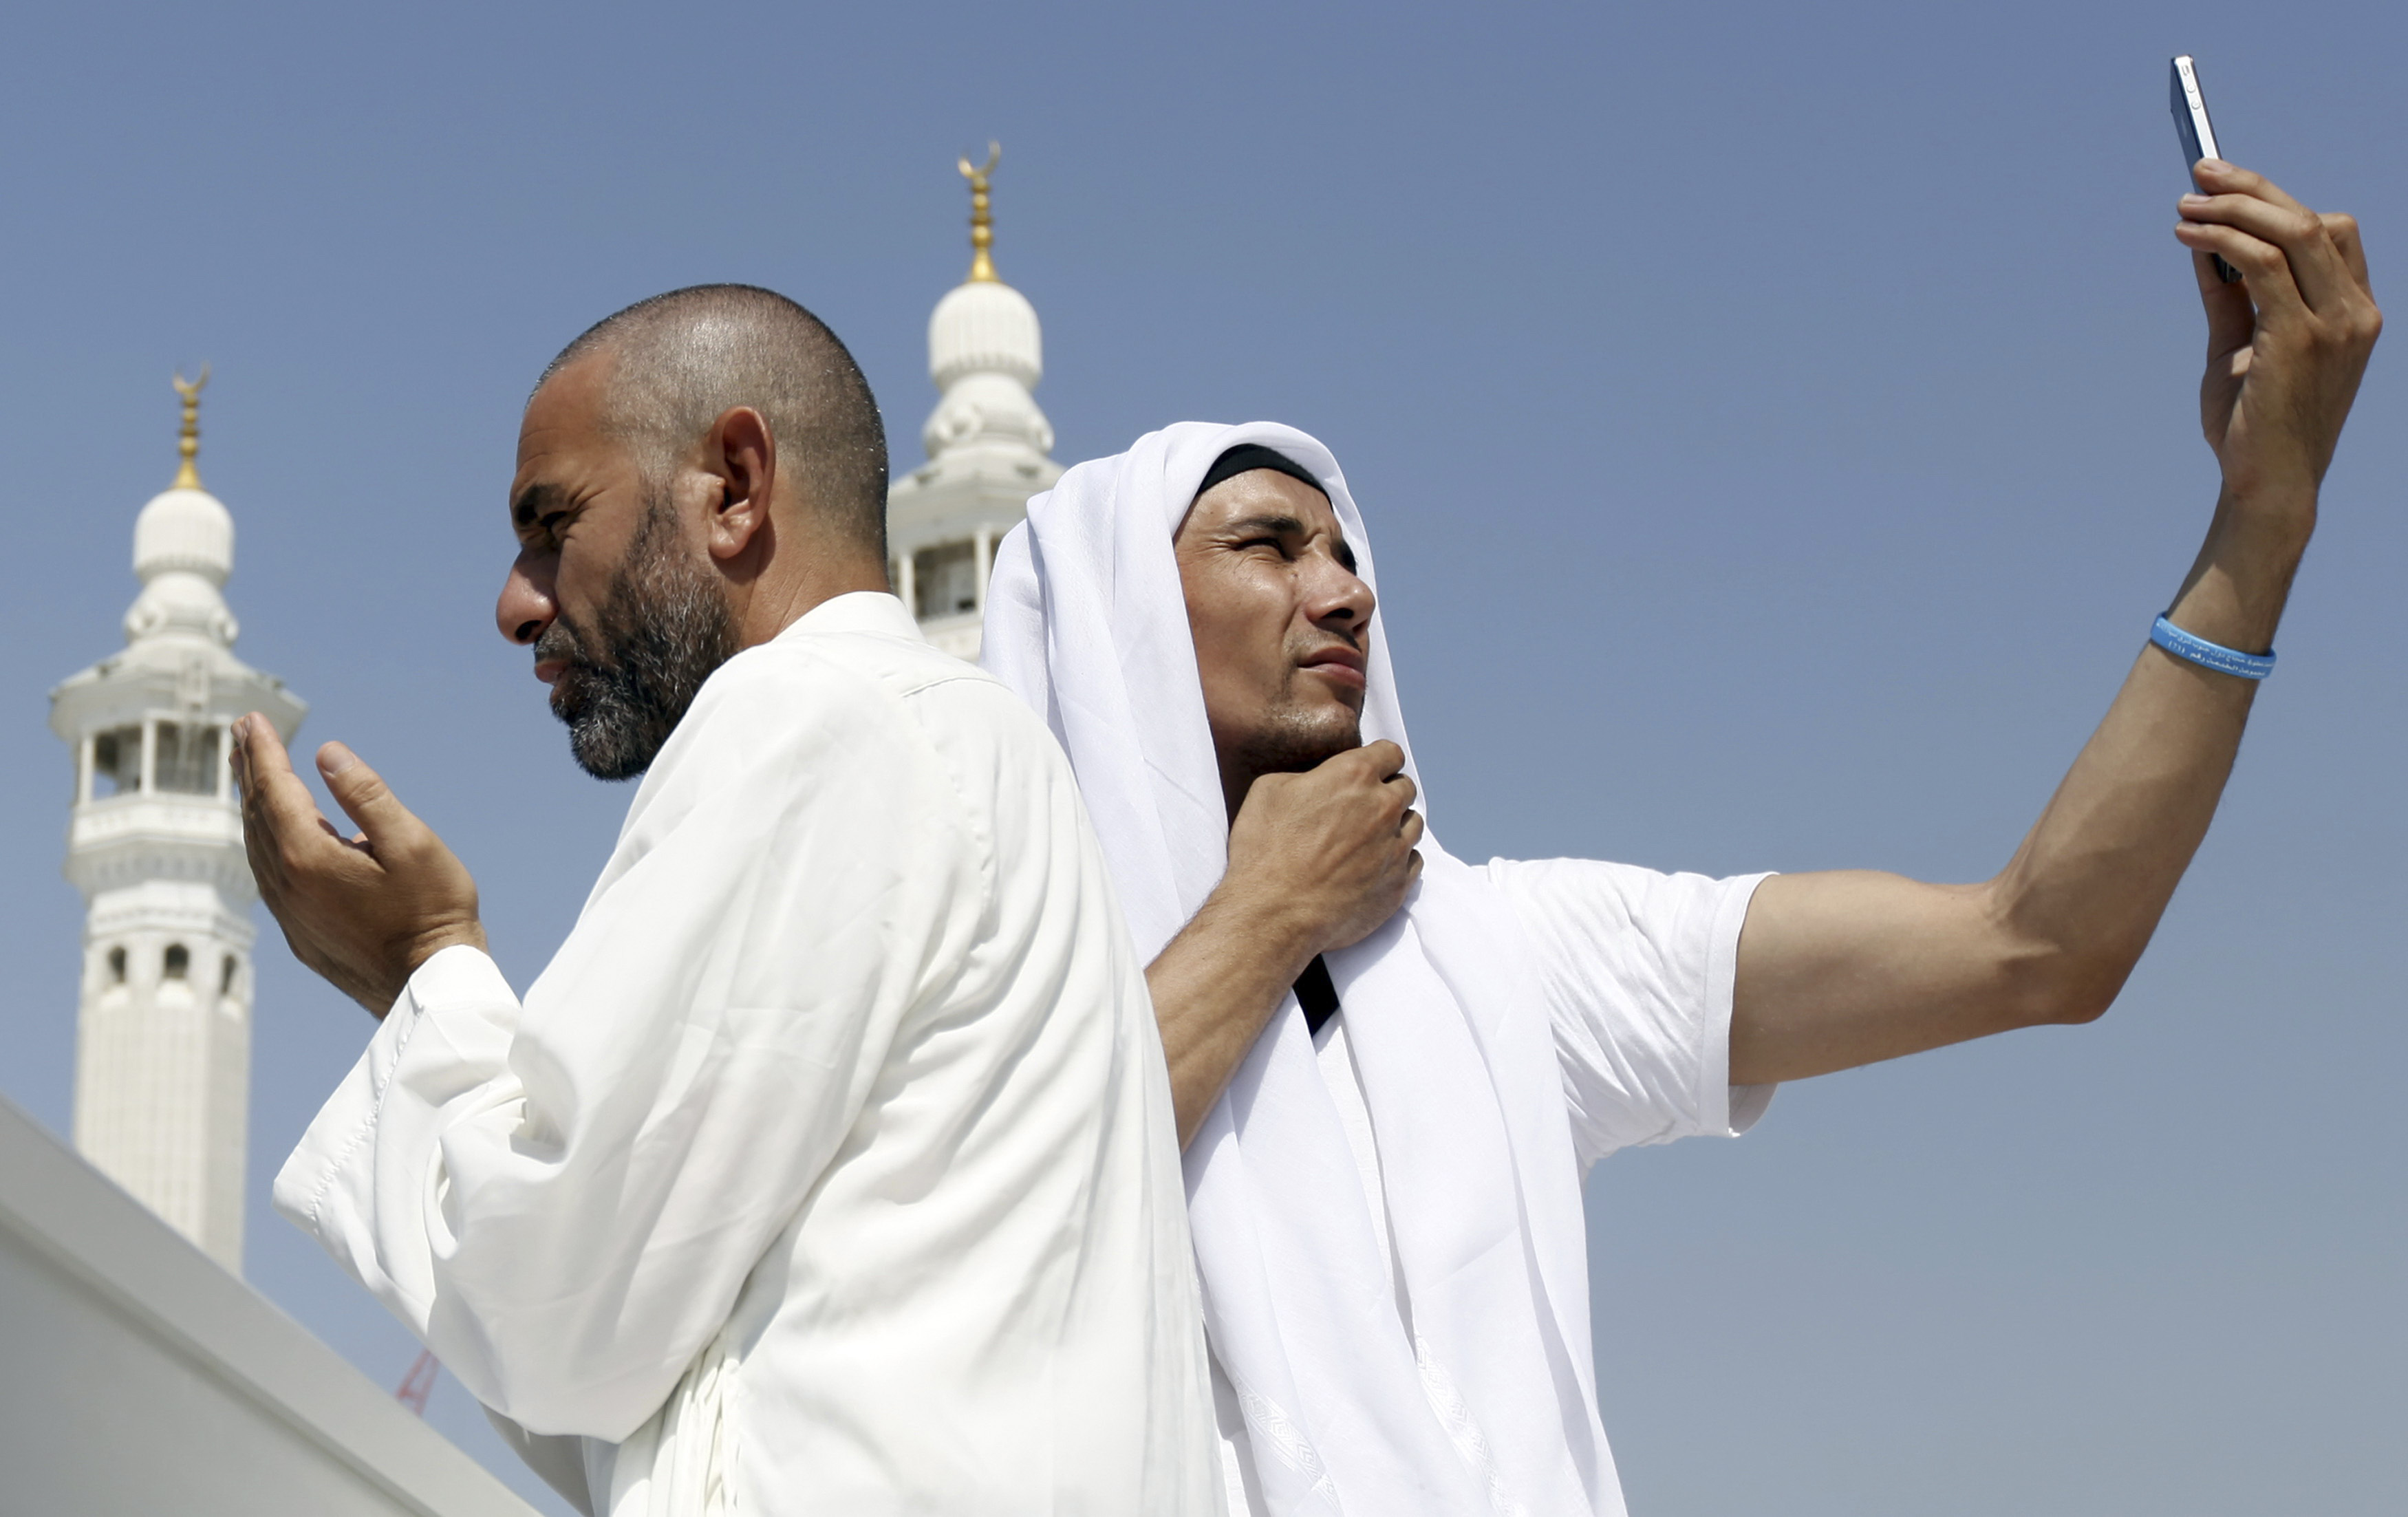 A Muslim pilgrim prays as another takes a photo with his mobile phone at the Grand Mosque during Tawaf al-Wadaa (Farewell Tawaf) on the last day of the annual haj pilgrimage in the holy city of Mecca October 29, 2012. REUTERS/Amr Abdallah Dalsh (SAUDI ARABIA - Tags: RELIGION TPX IMAGES OF THE DAY) - RTR39QGZ